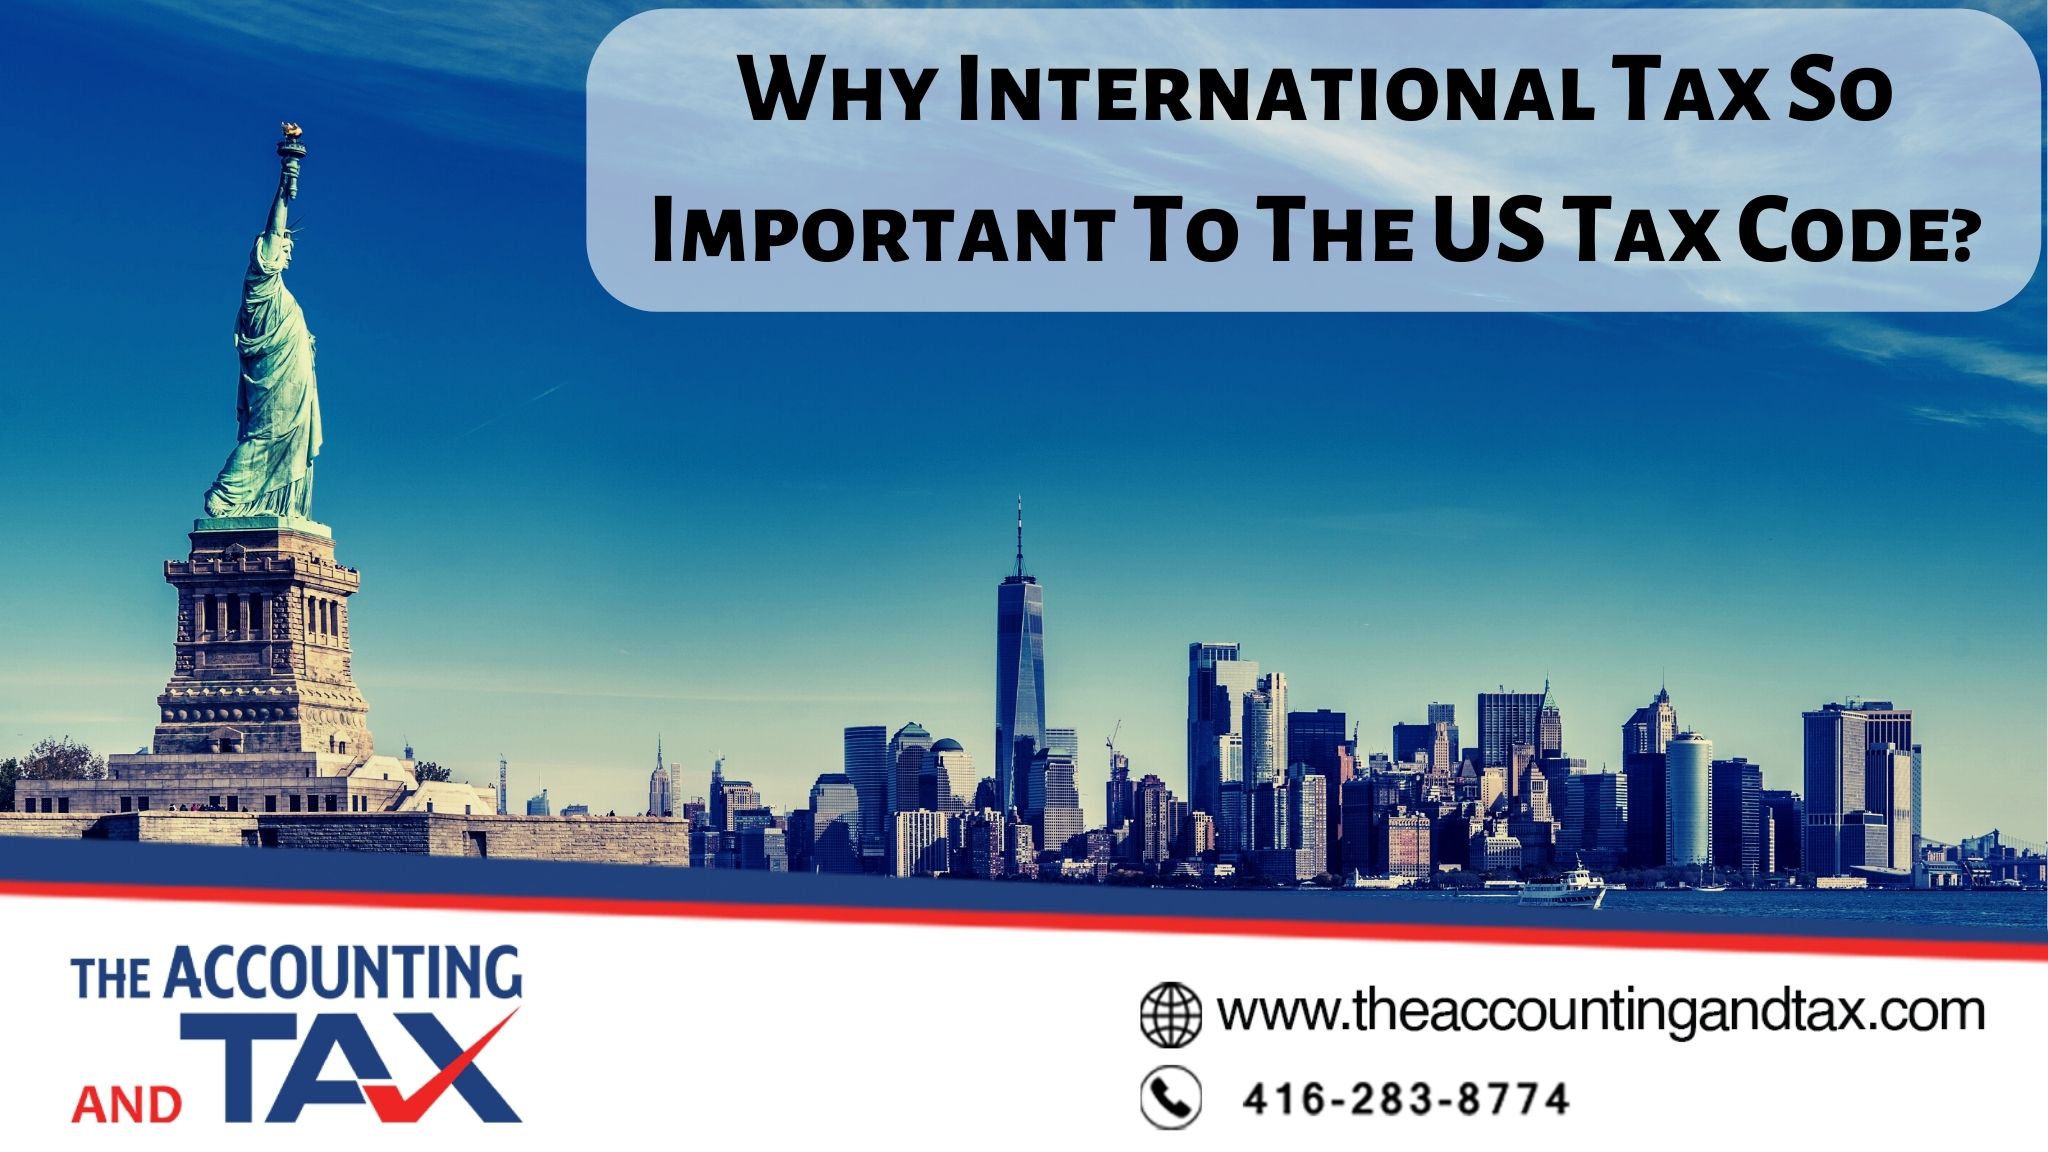 Why-is-international-tax-so-important-to-the-U.S.-tax-code